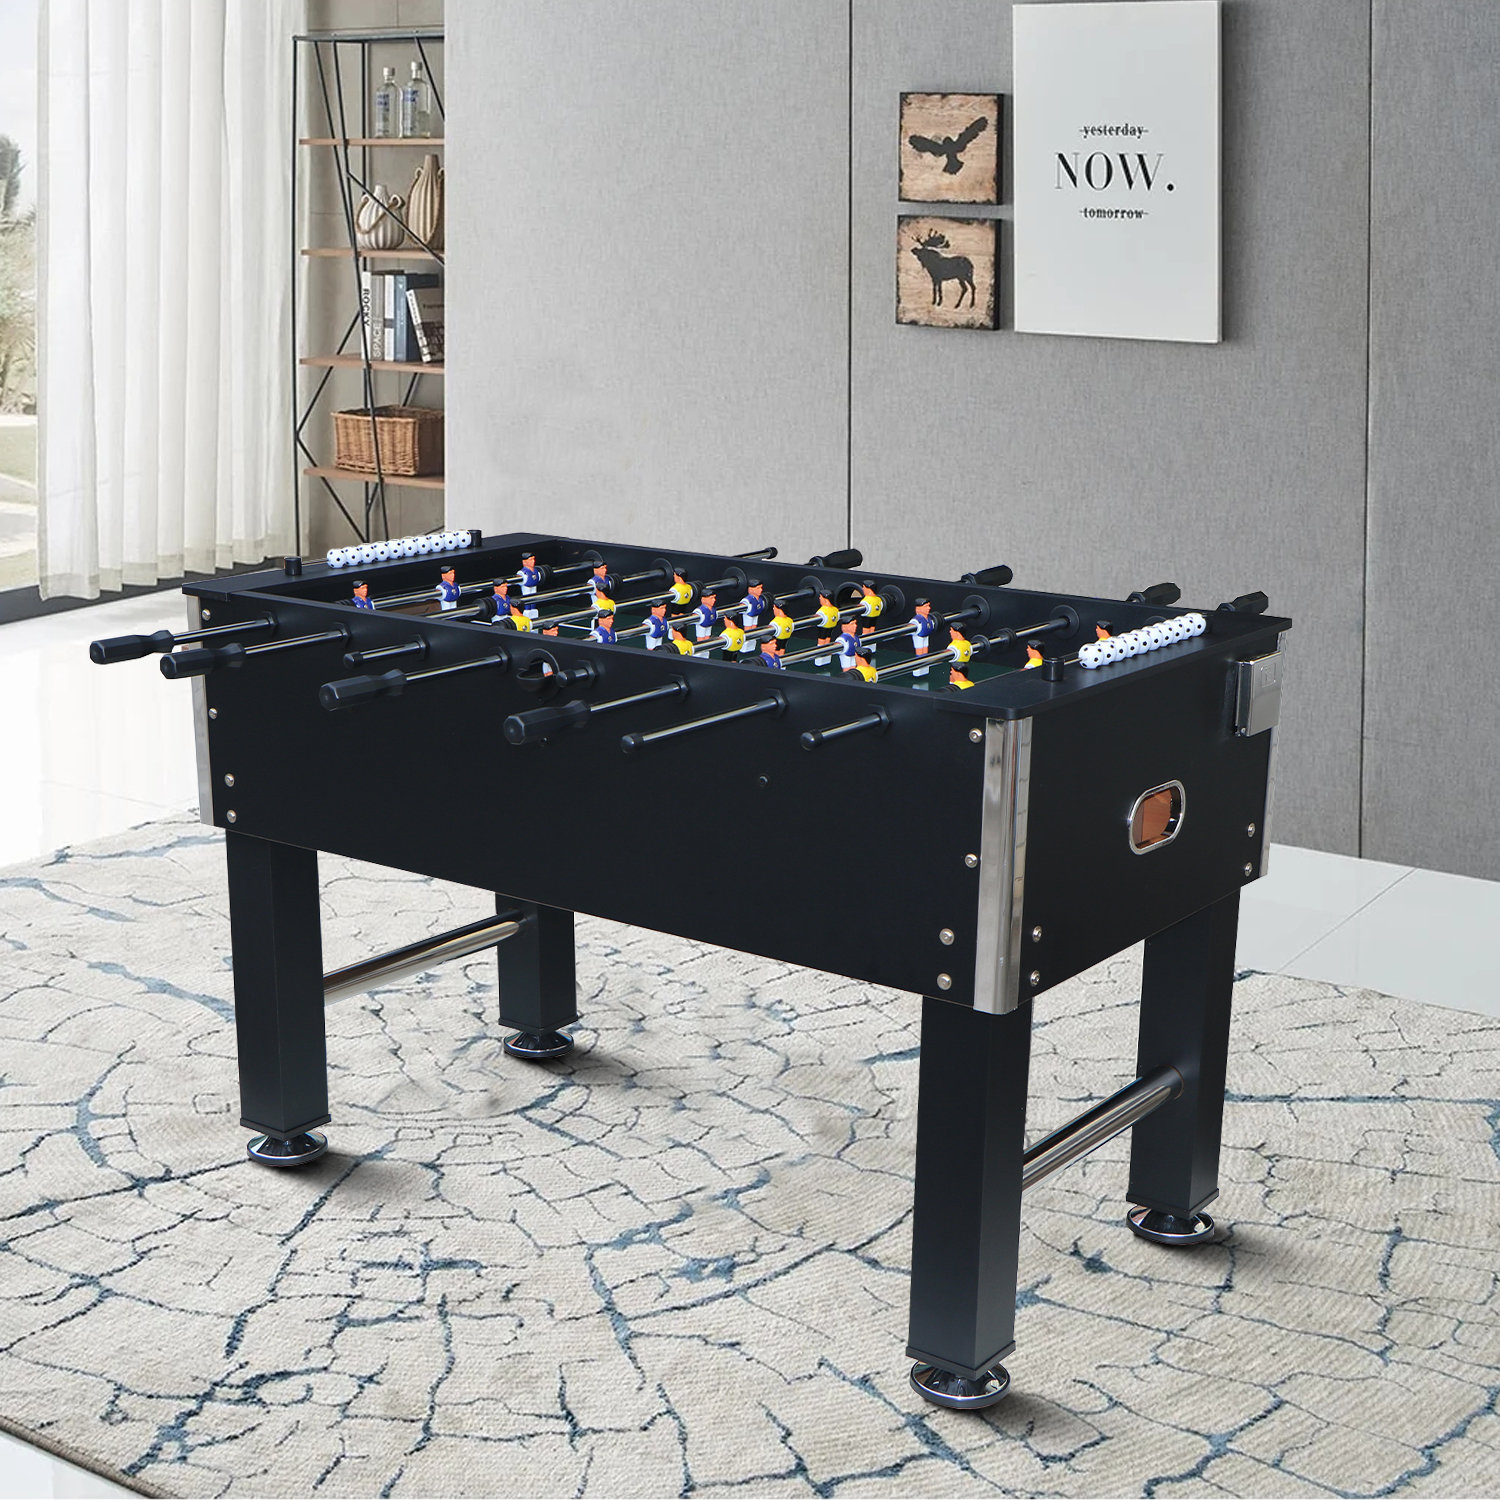 Knlnny Ware 54.51'' L Foosball Table with Telescopic Rods